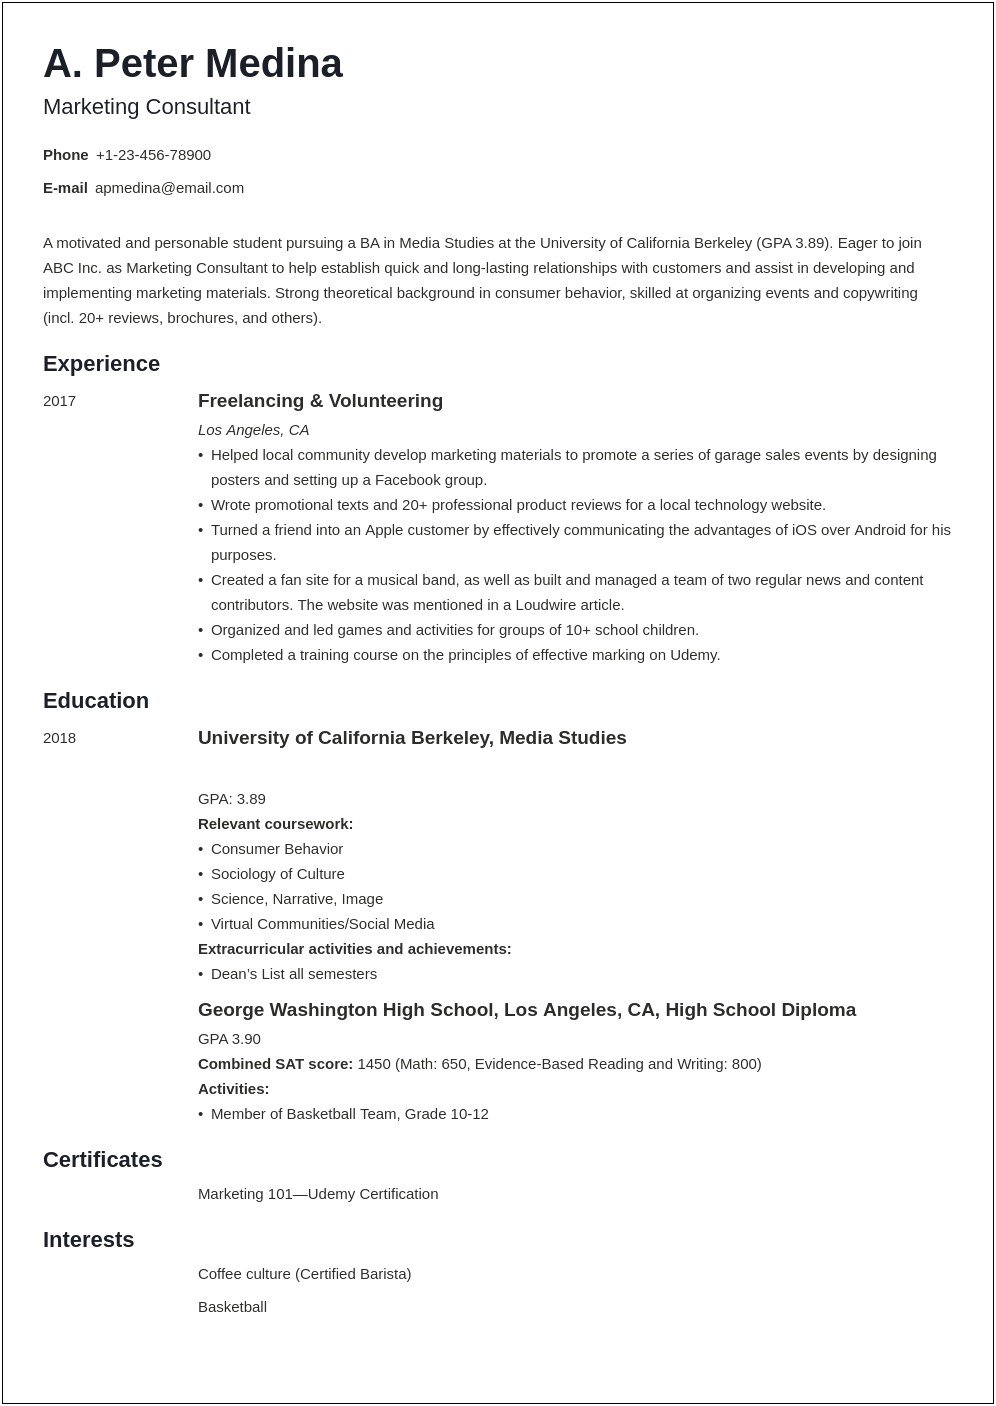 Resume Objective Sample With No Experience